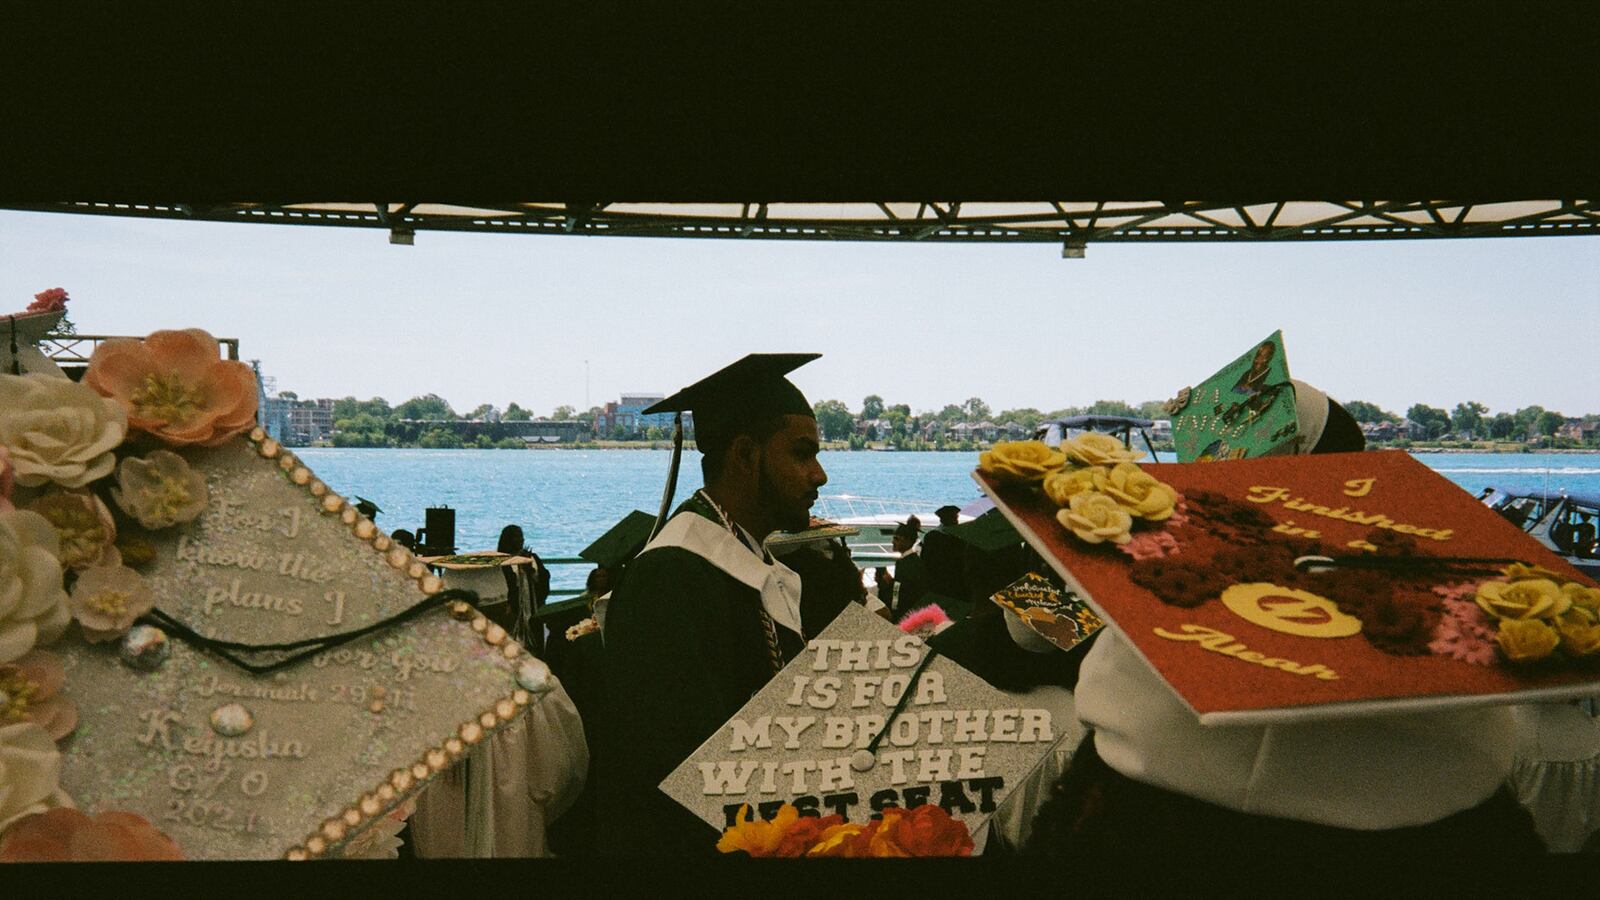 A young man walks by a group of young women, all about to graduate. The caps of the young women are all beautifully adorned with phrases, flowers and pearls.